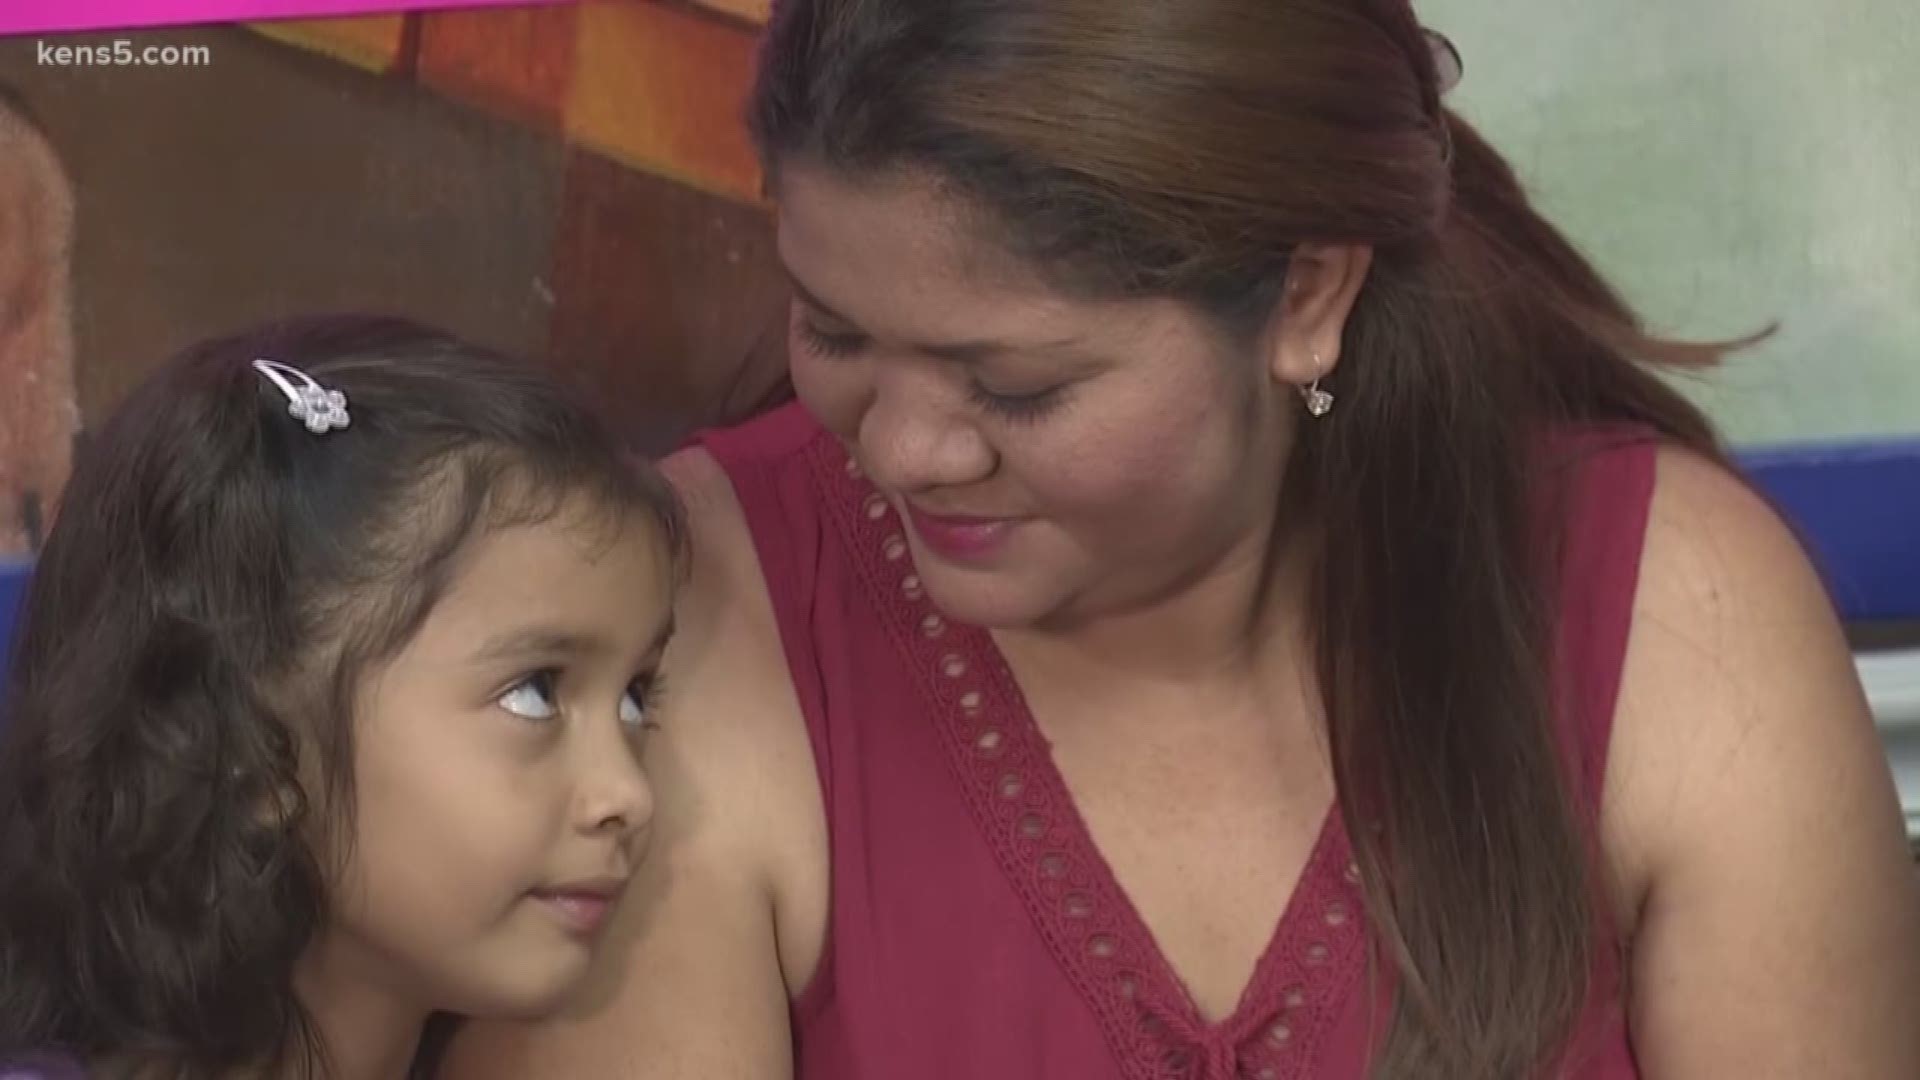 A 6-year-old girl, whose cries were heard on a viral audio recording, was reunited with her mother in Houston on Friday.